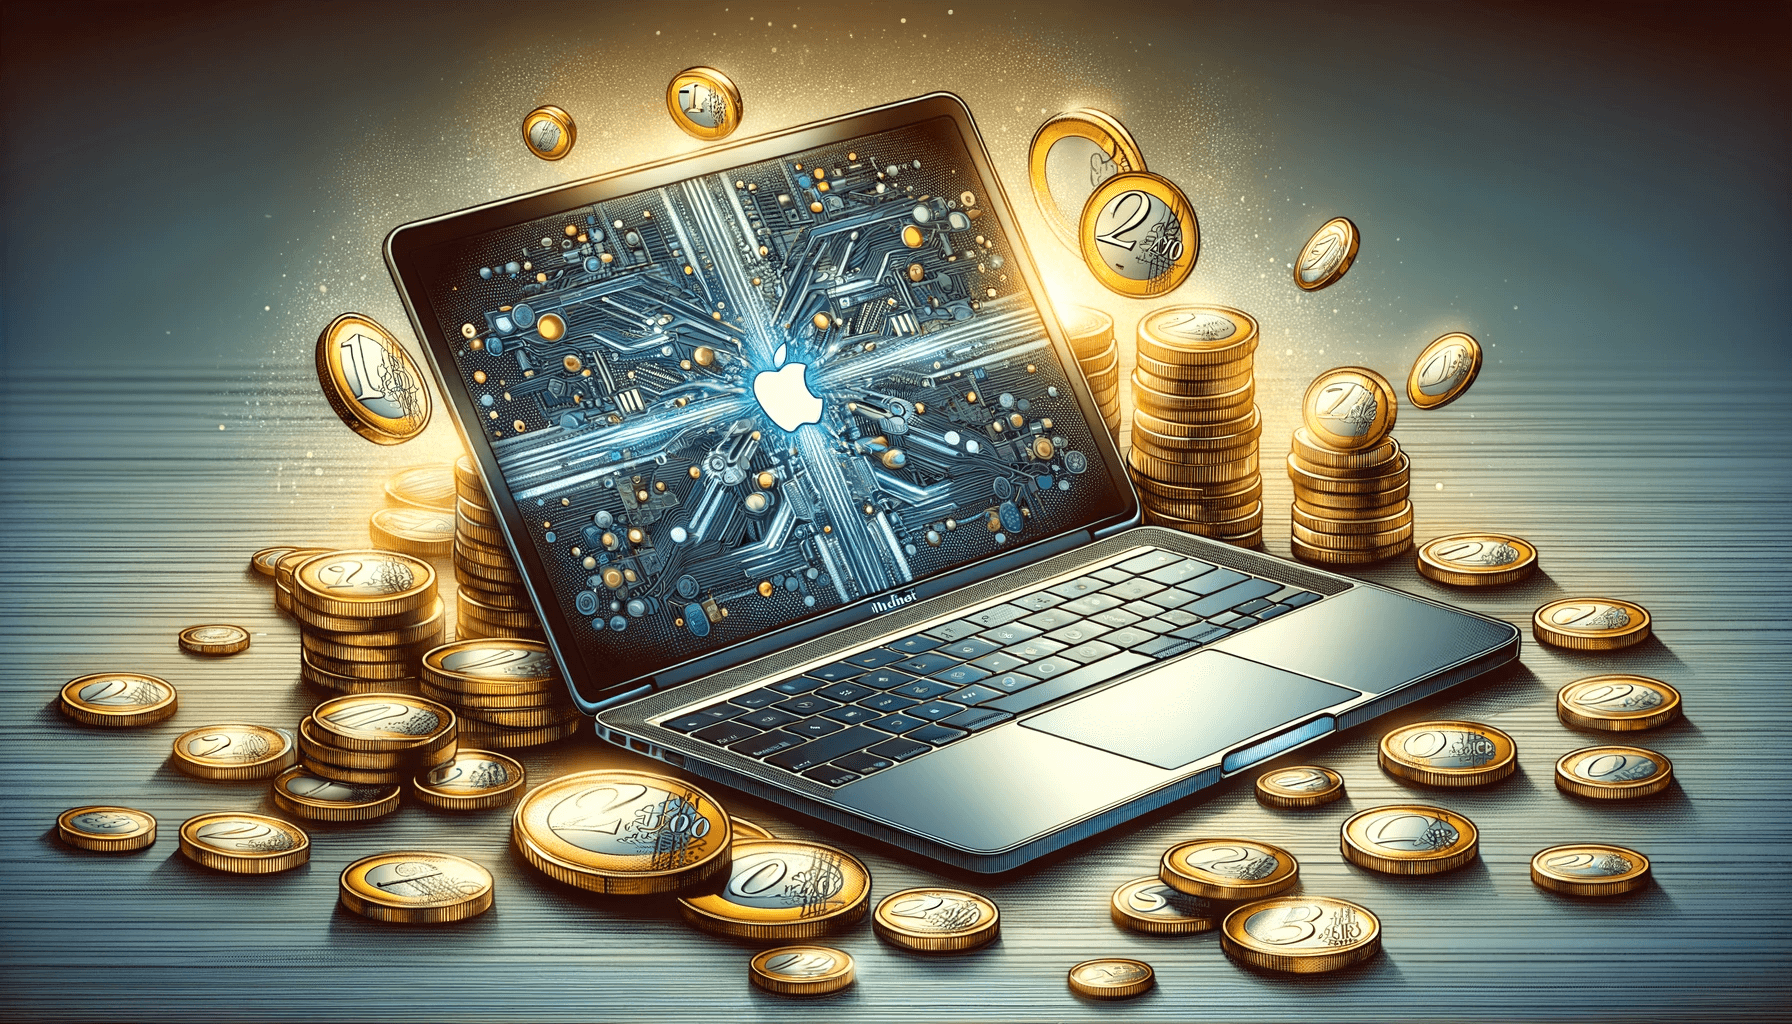 DALL·E 2023 12 19 15.20.29 A digital illustration of a MacBook with euro coins in the background. The MacBook is depicted open on a desk showcasing its sleek design and high re 1